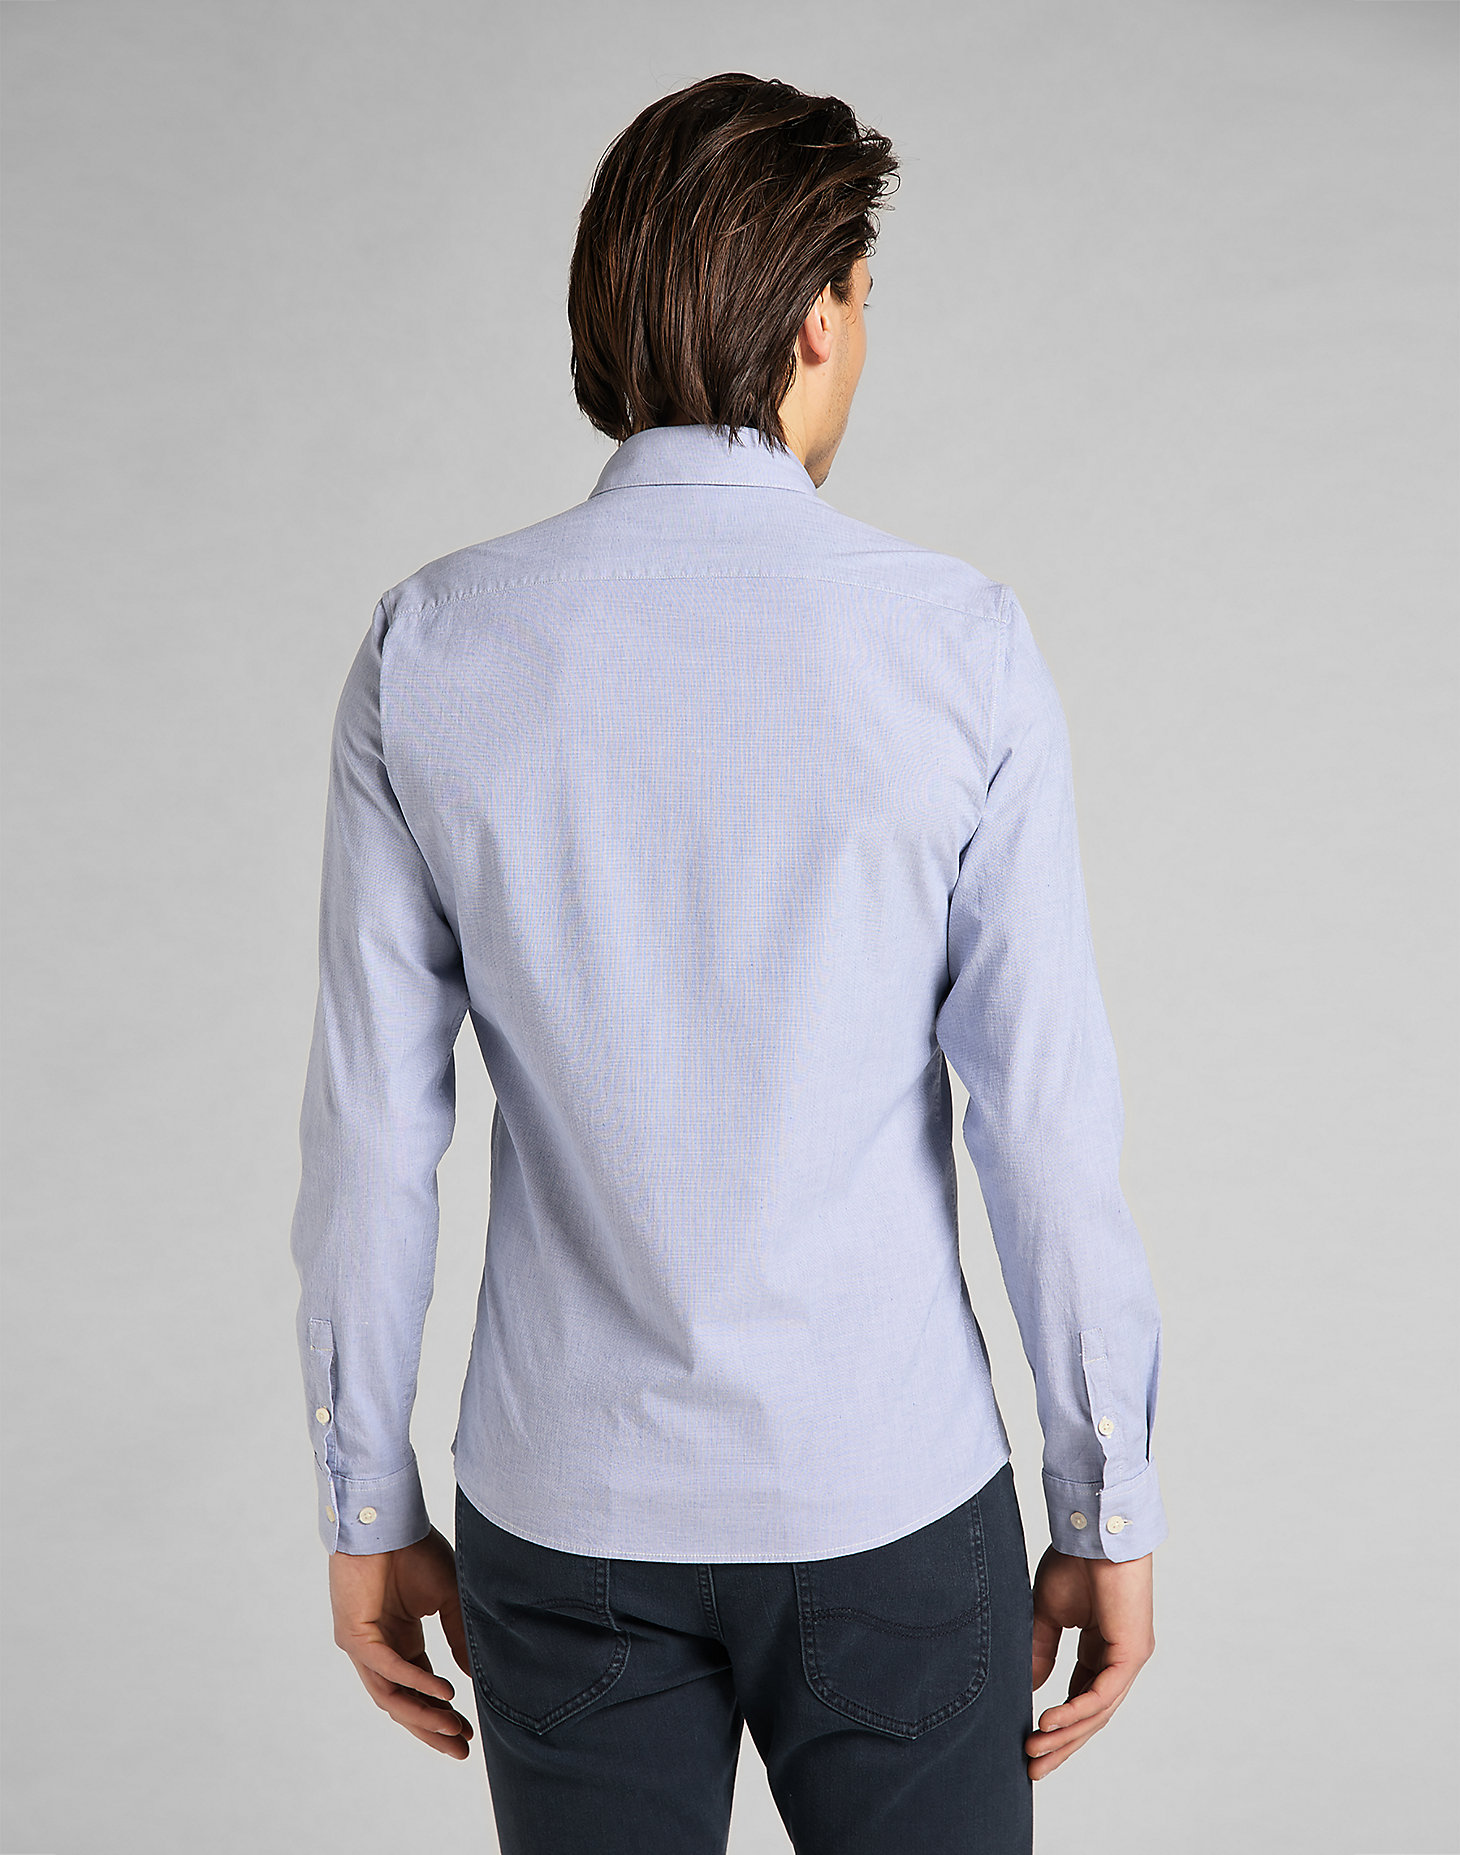 Slim Button Down Shirt in Washed Blue alternative view 1